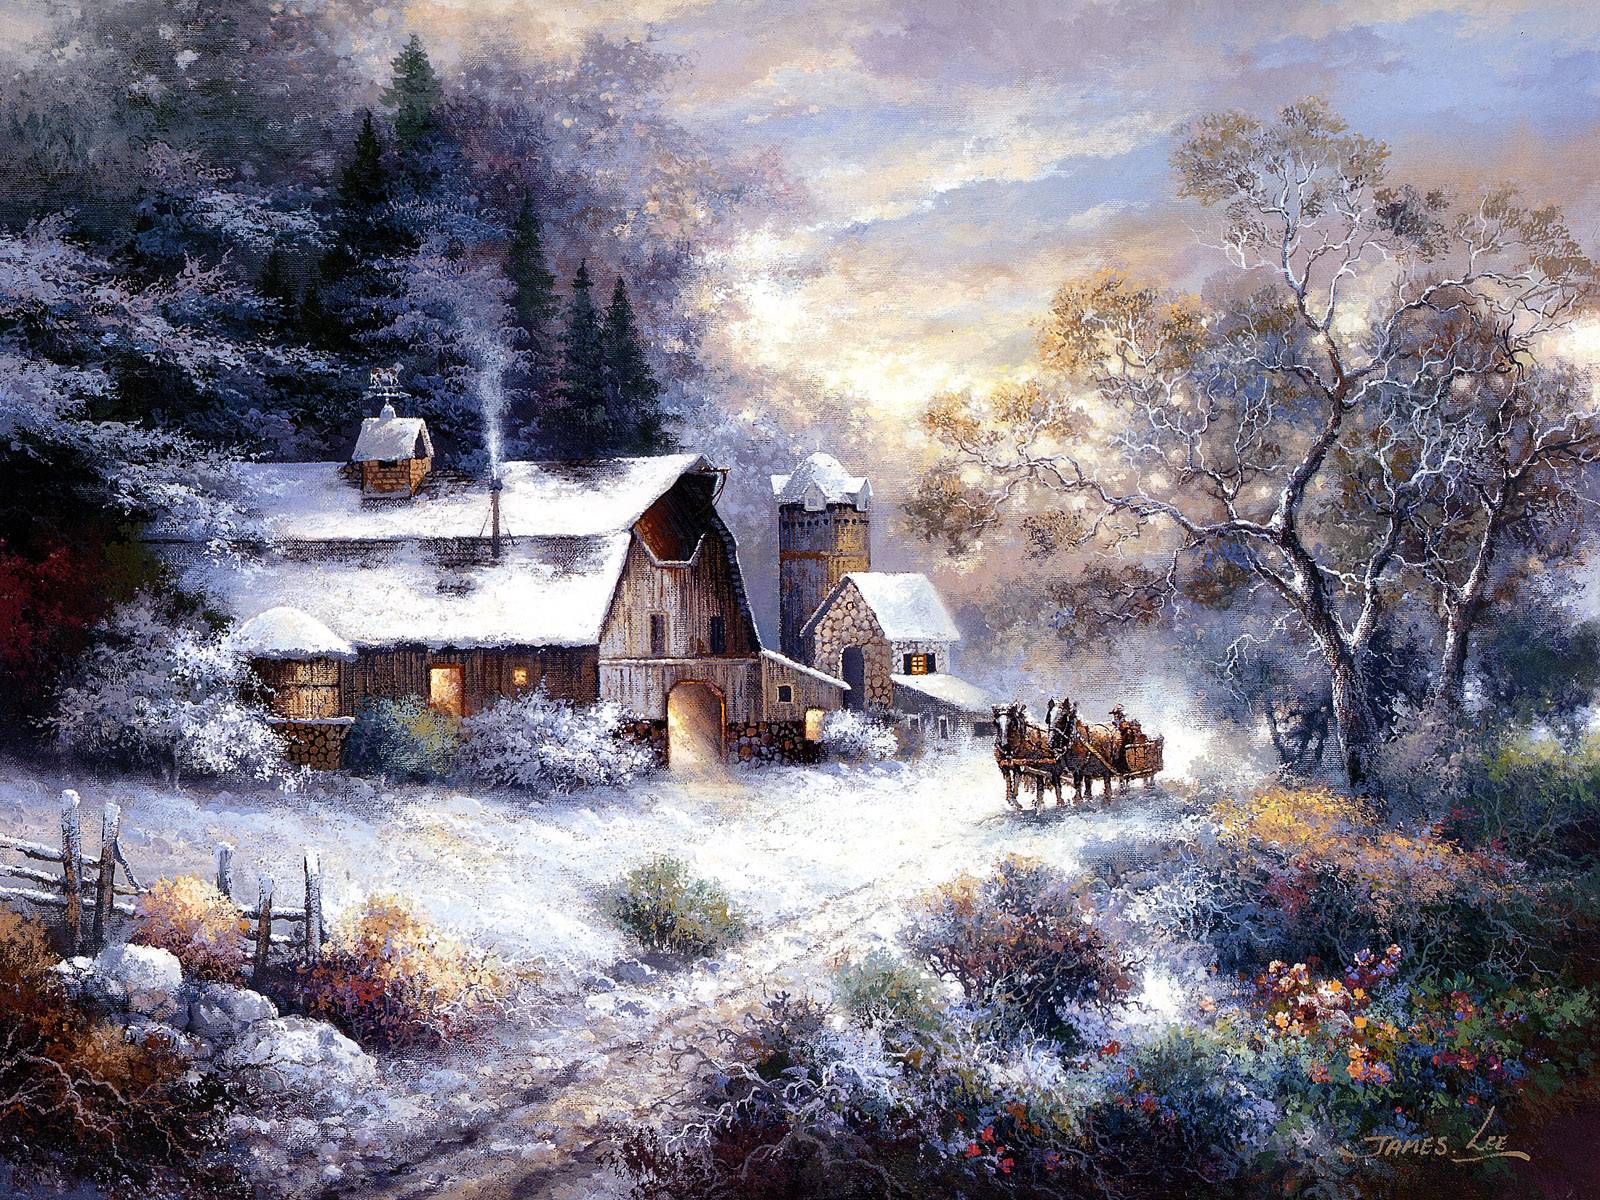 Snowy Evening Outing James Lee Paintings Wallpaper Image